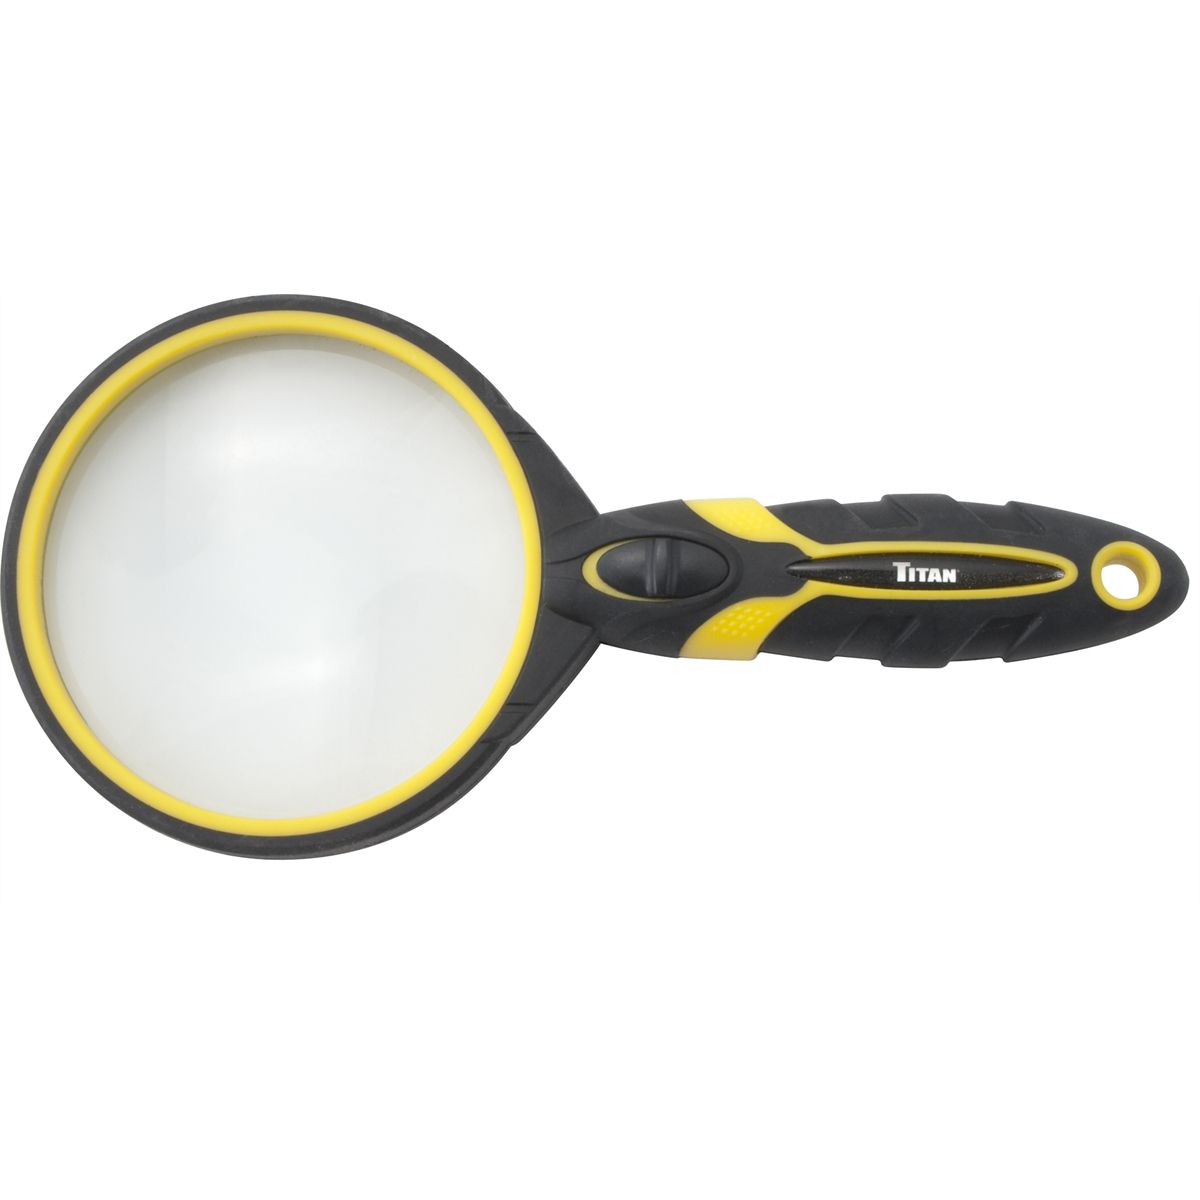 Set of 4 Glass Magnifiers with Rubberized Comfort Grip